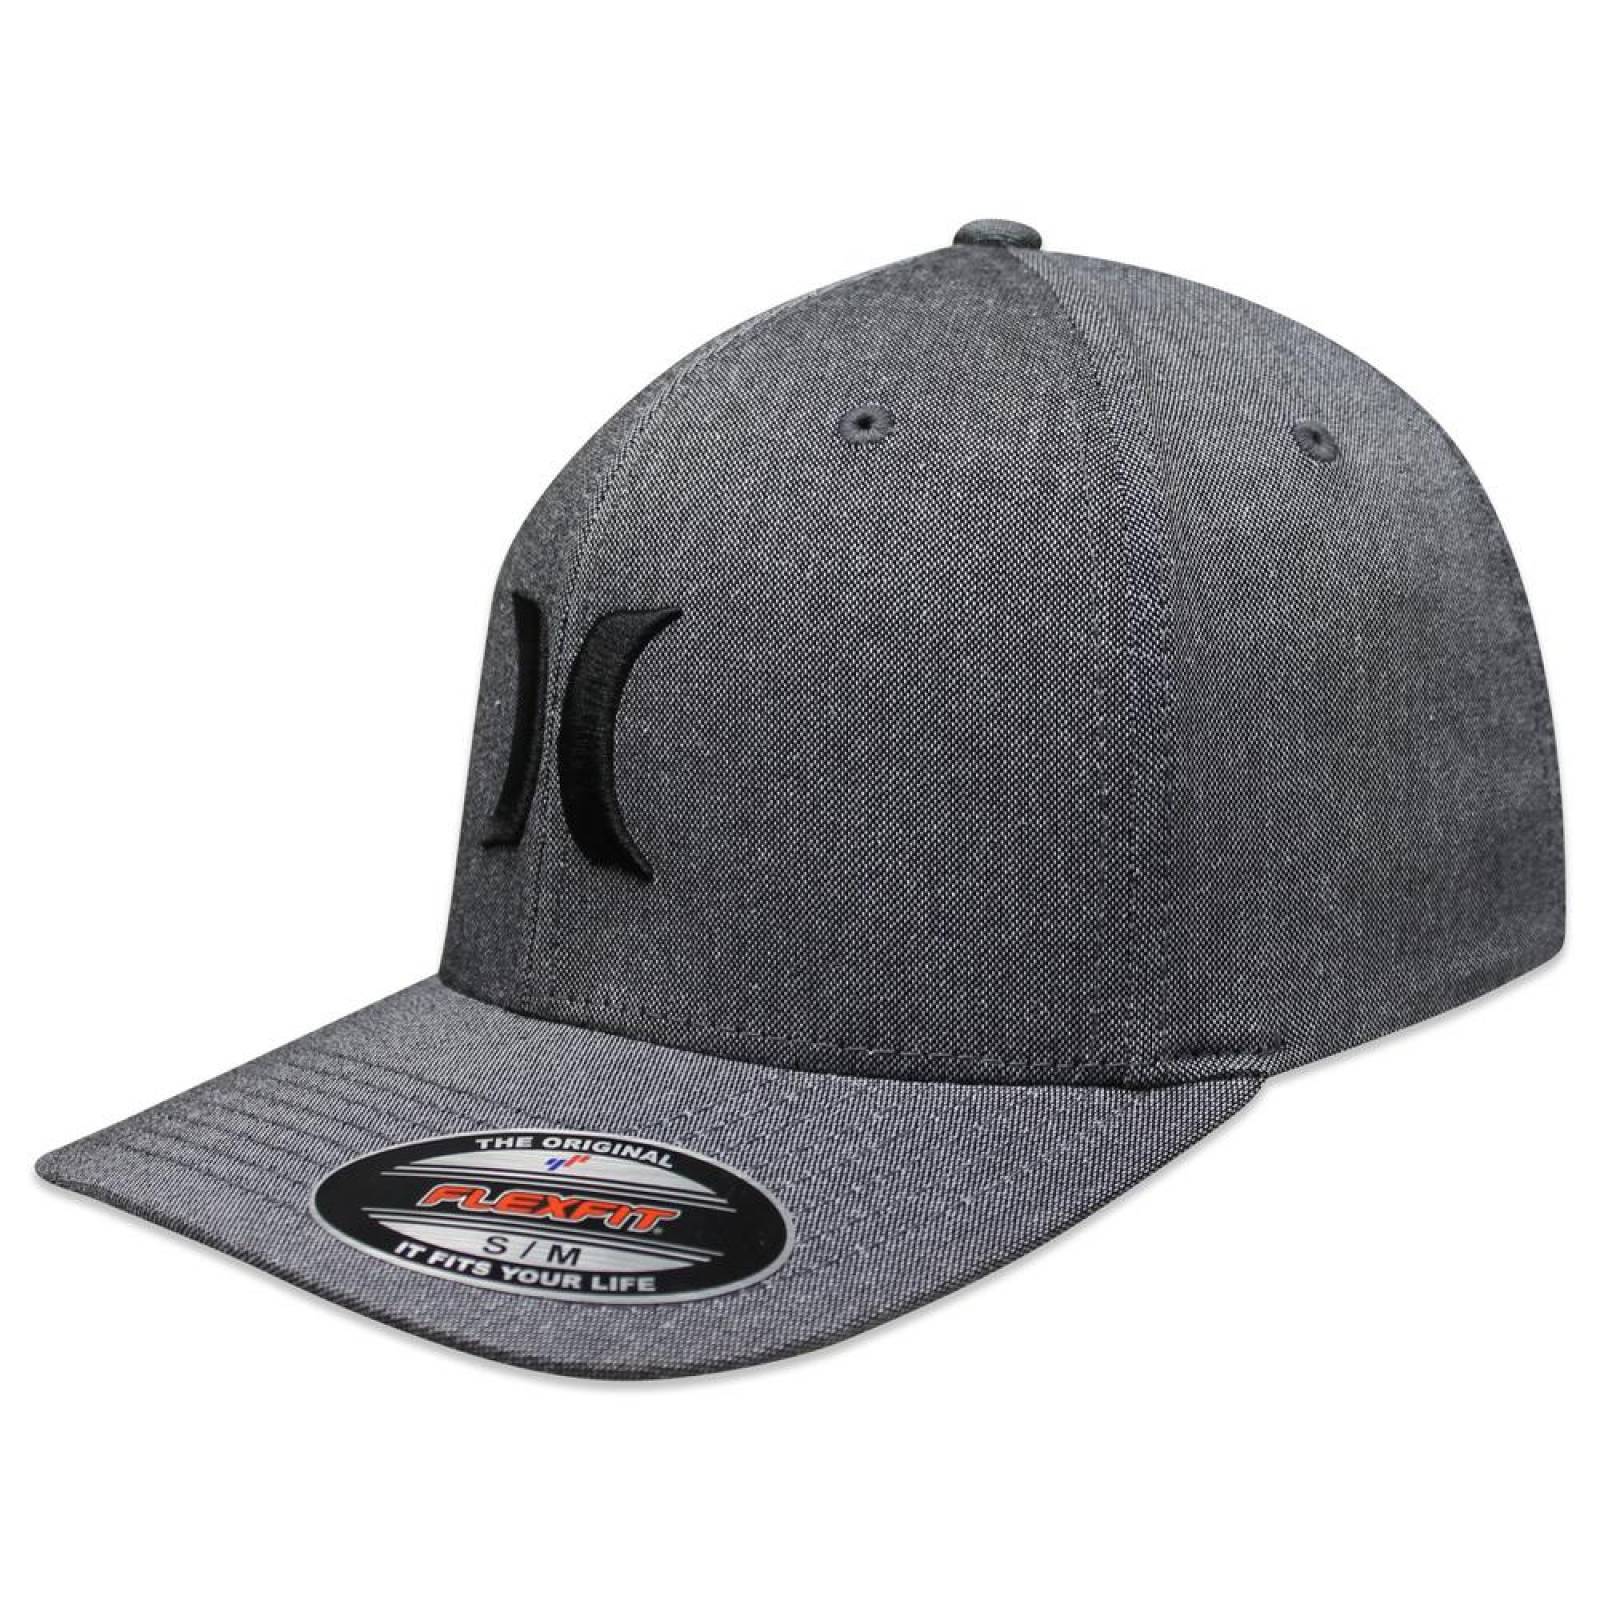 Gorra Hurley Suits Outline Hats Fit GrisNegro 